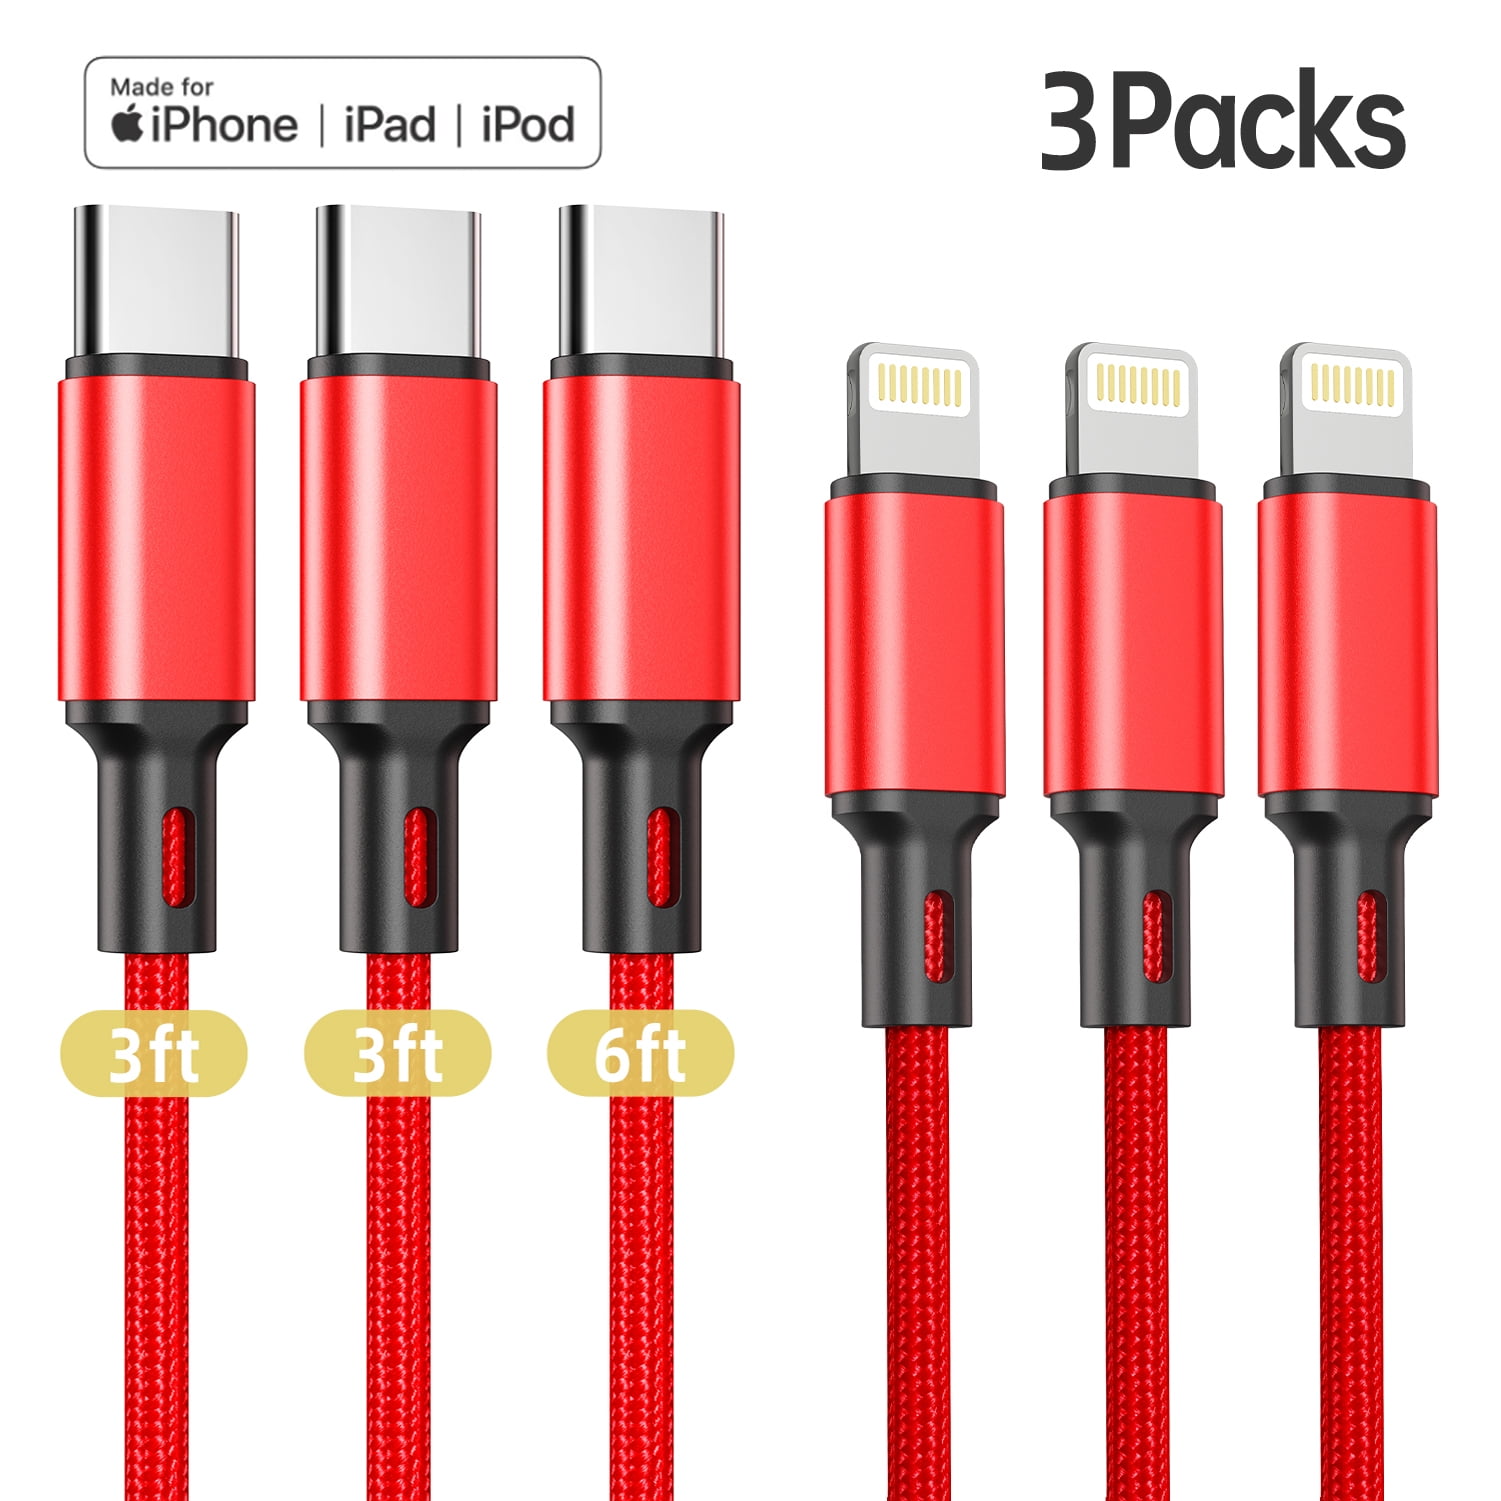 Lightning Cable Nylon Braided High Speed USB Charging Cord Compatible with iPhone 13 Pro Max/12/11 Pro/XS/XR/X/8/7/6/5/iPad Apple Mfi-Certified Gray Black Firsting iPhone Charger Cable 4 Pack 6FT 